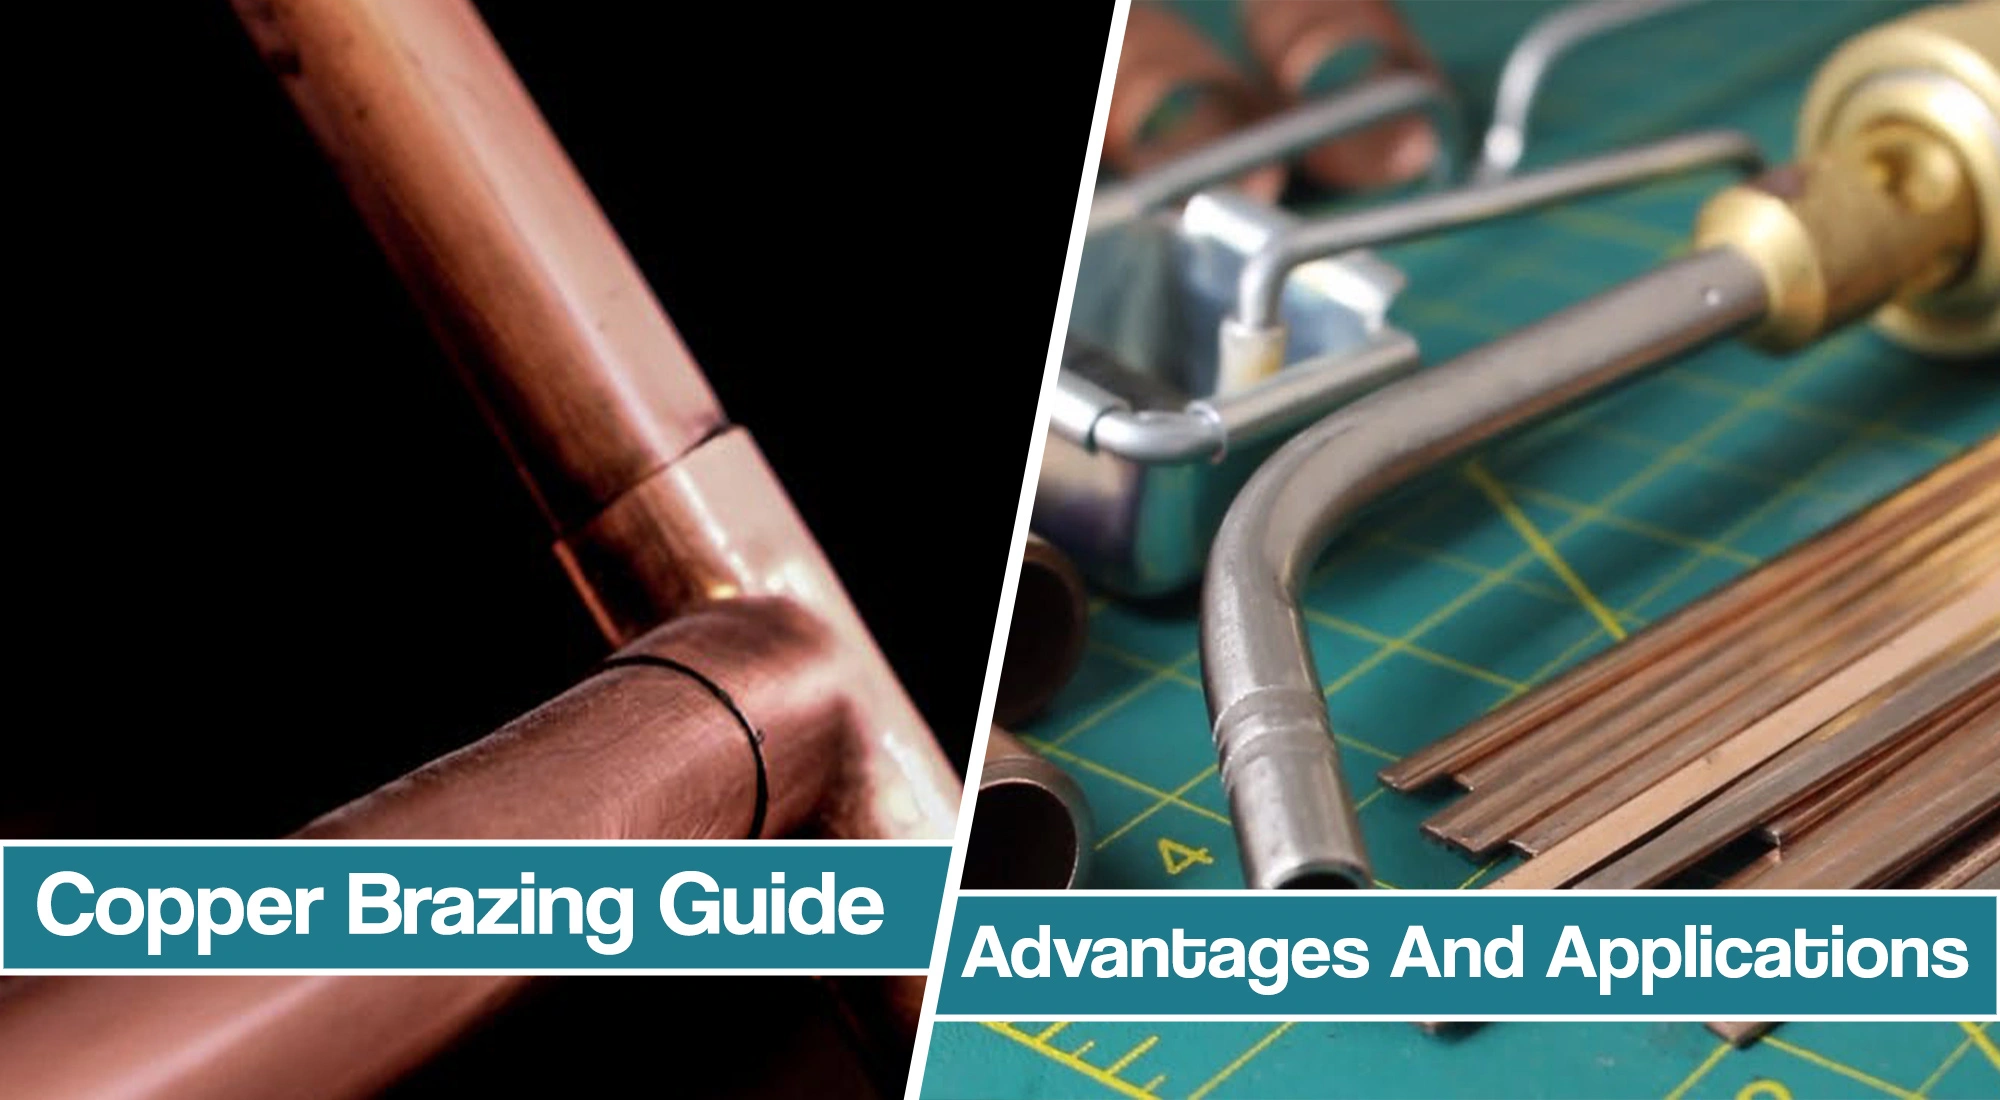 Copper brazing – Uses & Advantages of Brazing Copper